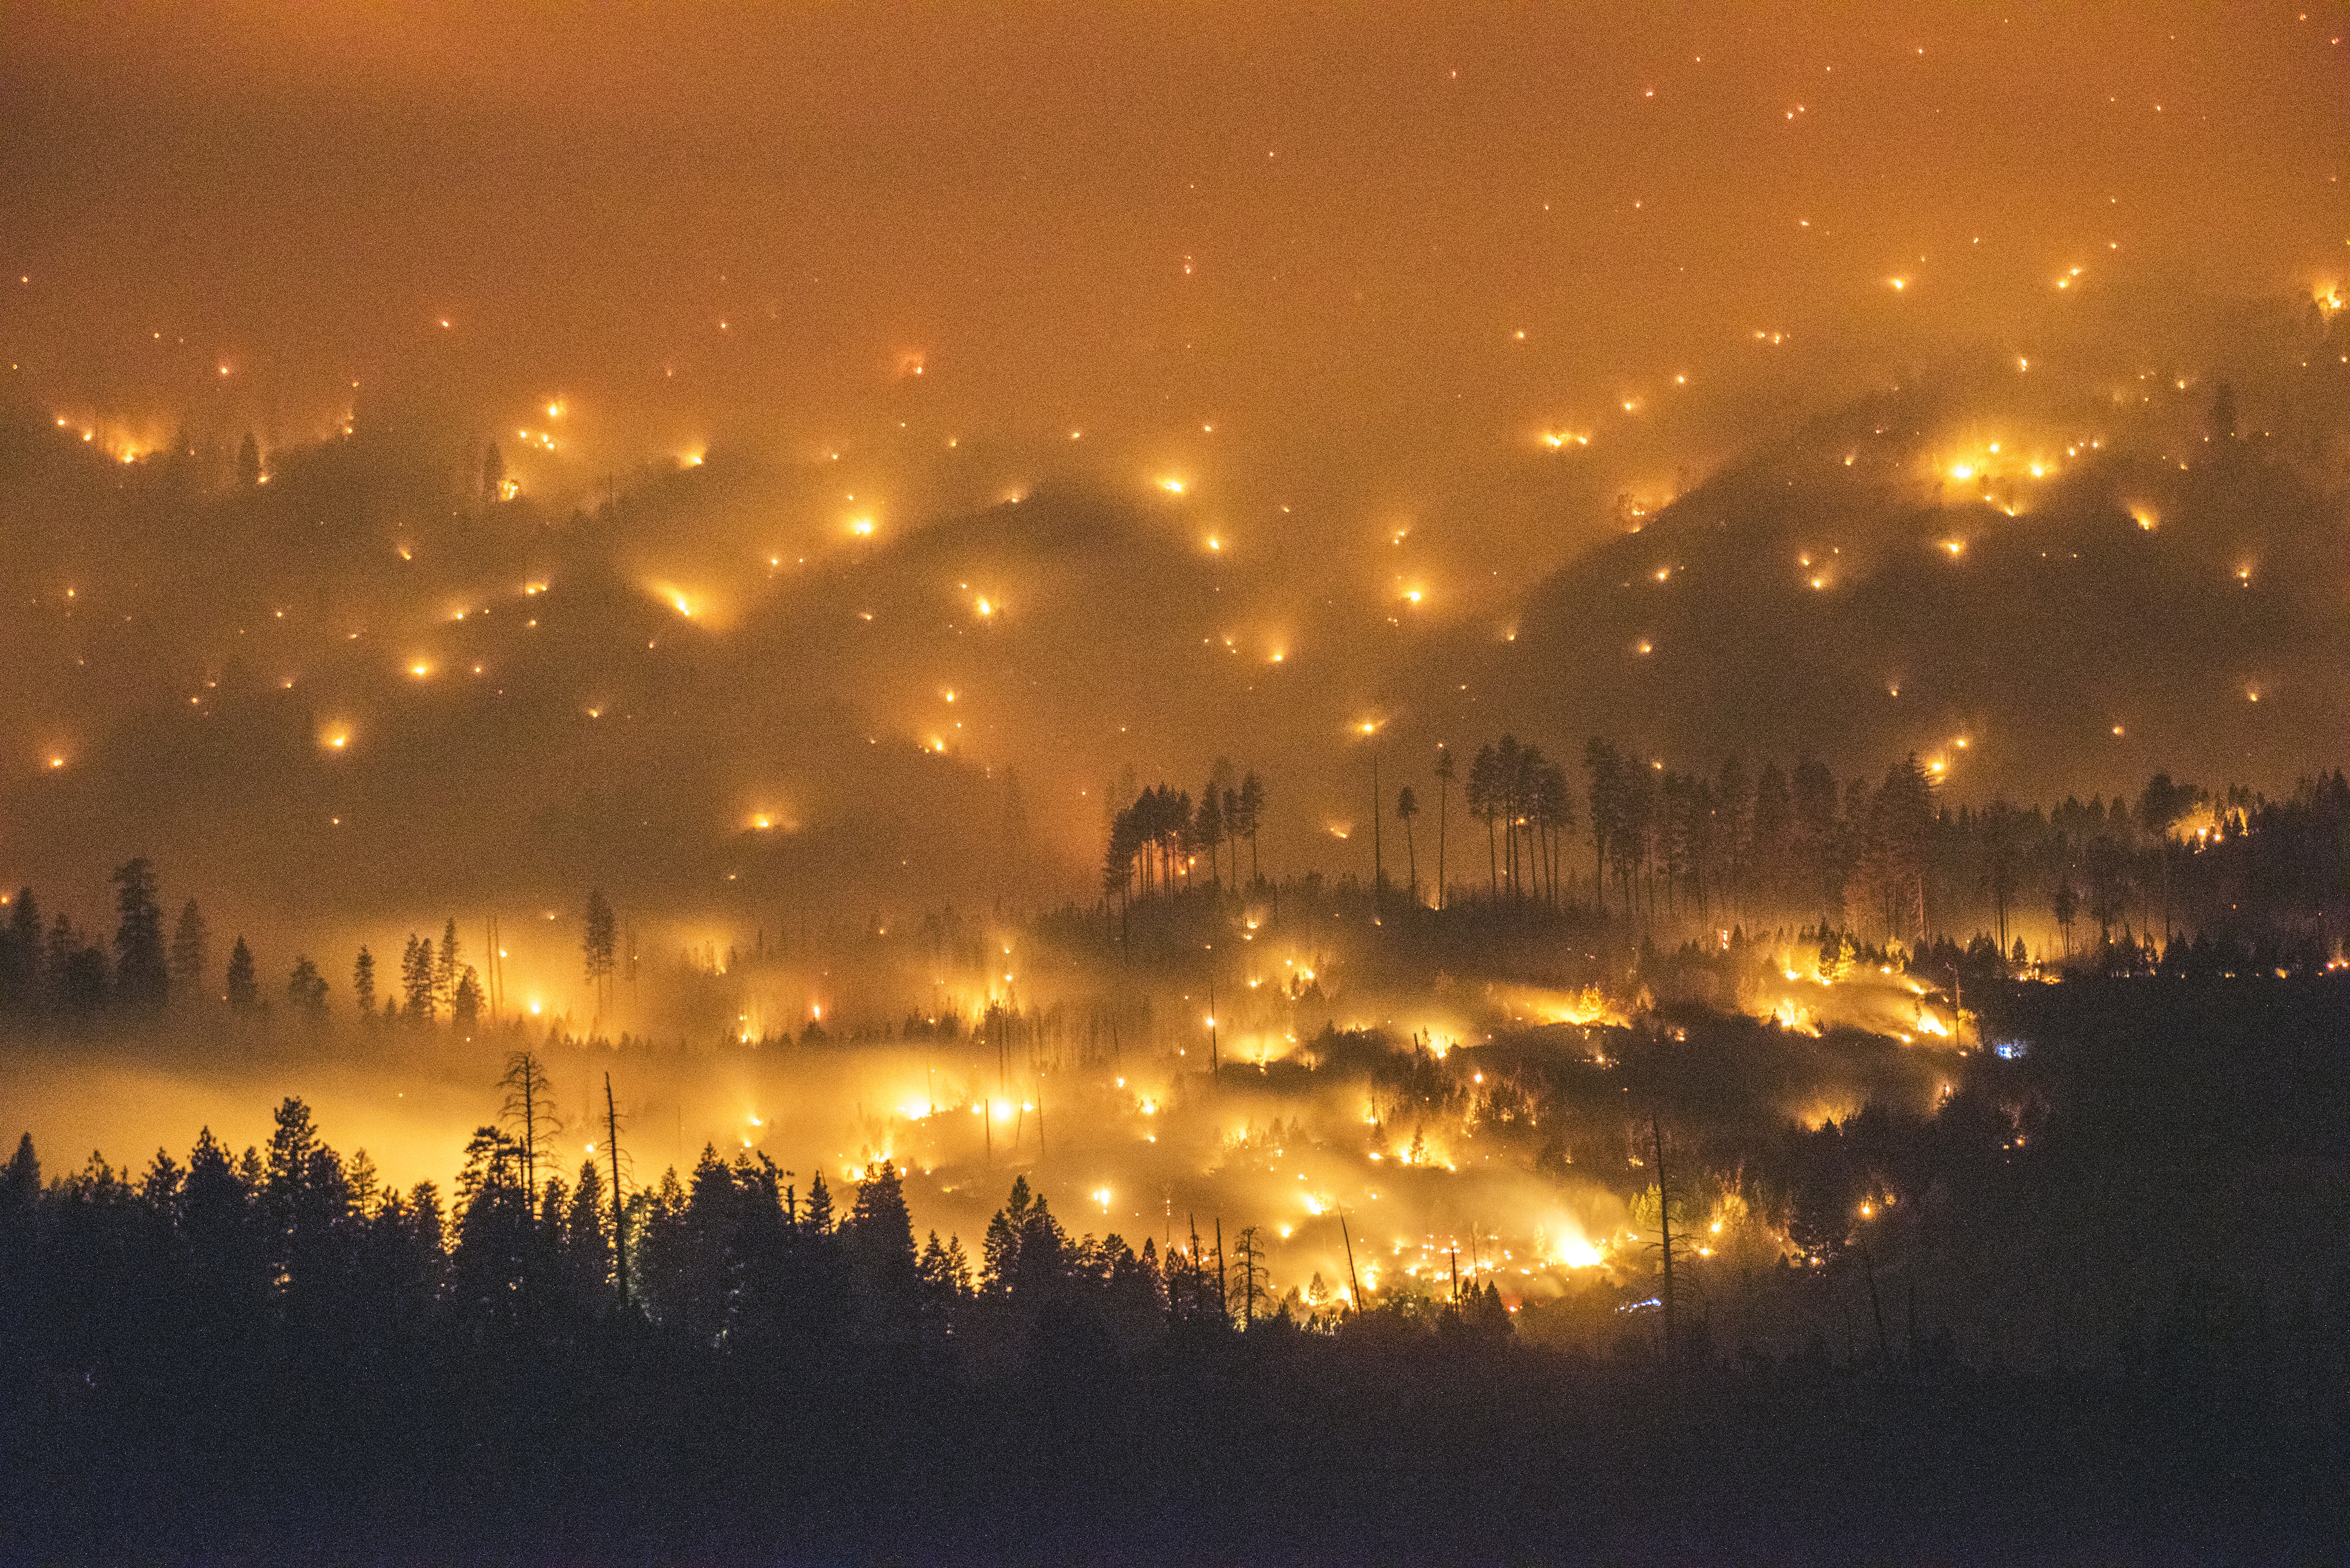 A long exposure image shows the El Portal Fire burning near Yosemite National Park, Calif., on July 27, 2014.